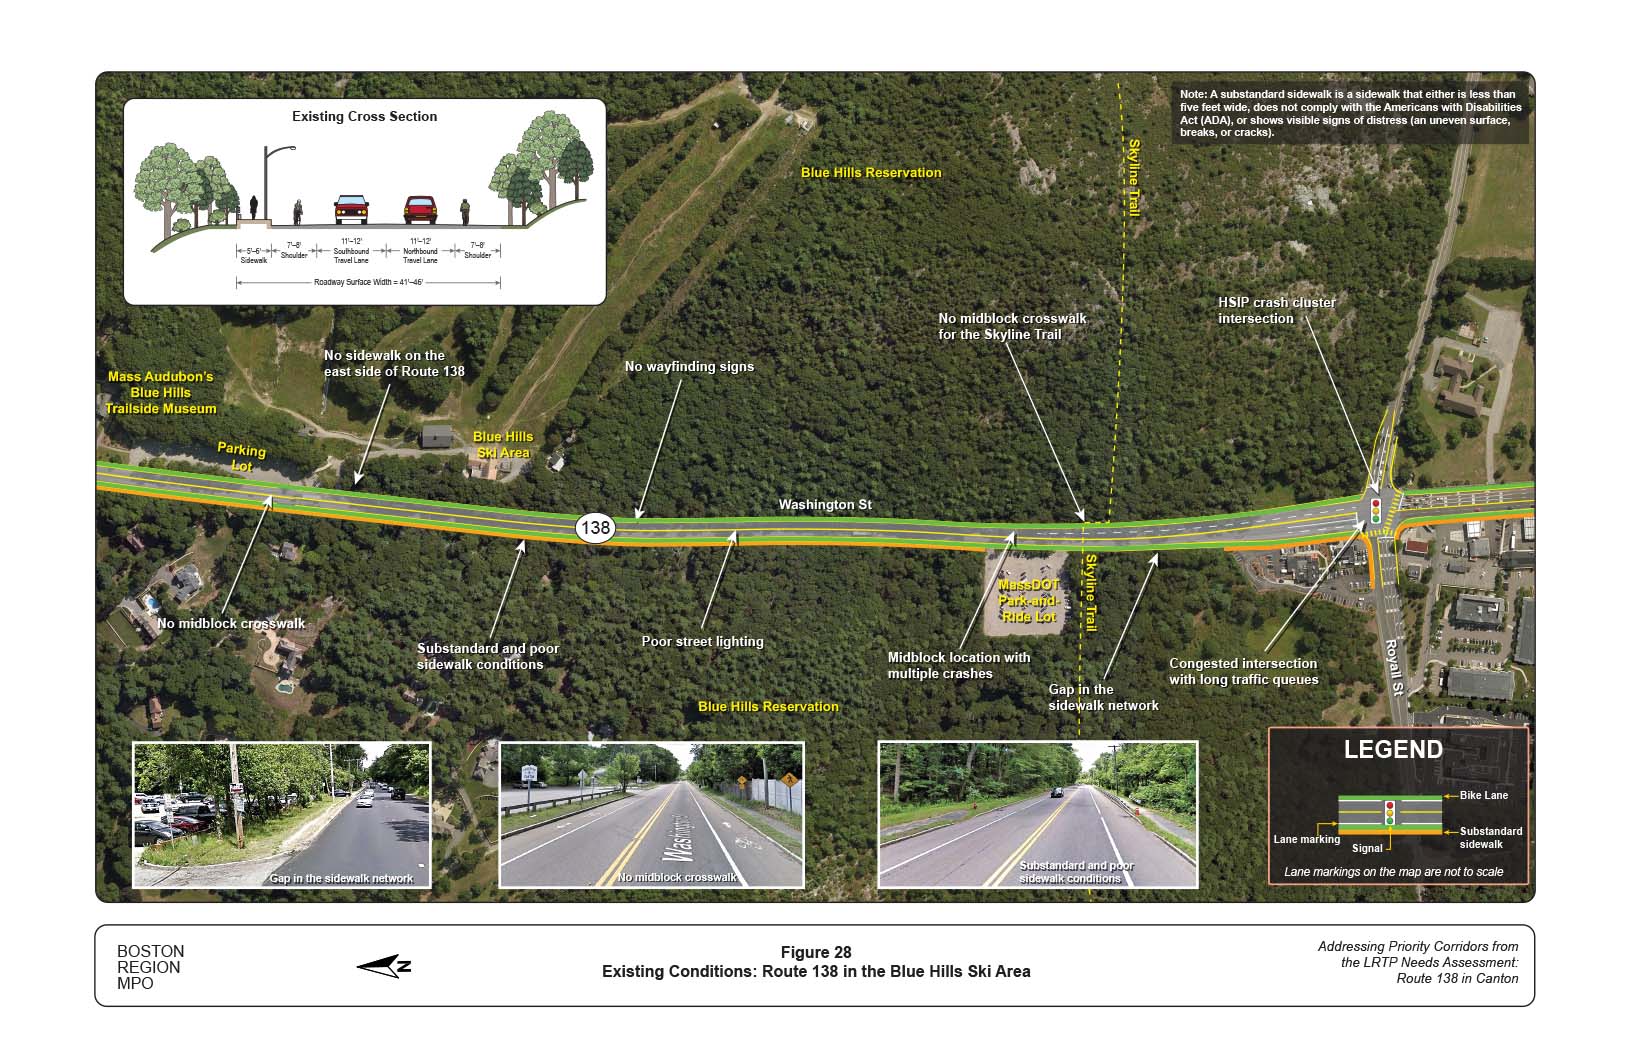 Figure 28 is a map of Route 138 near the Blue Hills Ski Area with overlays showing the locations of existing problems on the roadway and a graphic of the current cross section of the roadway.